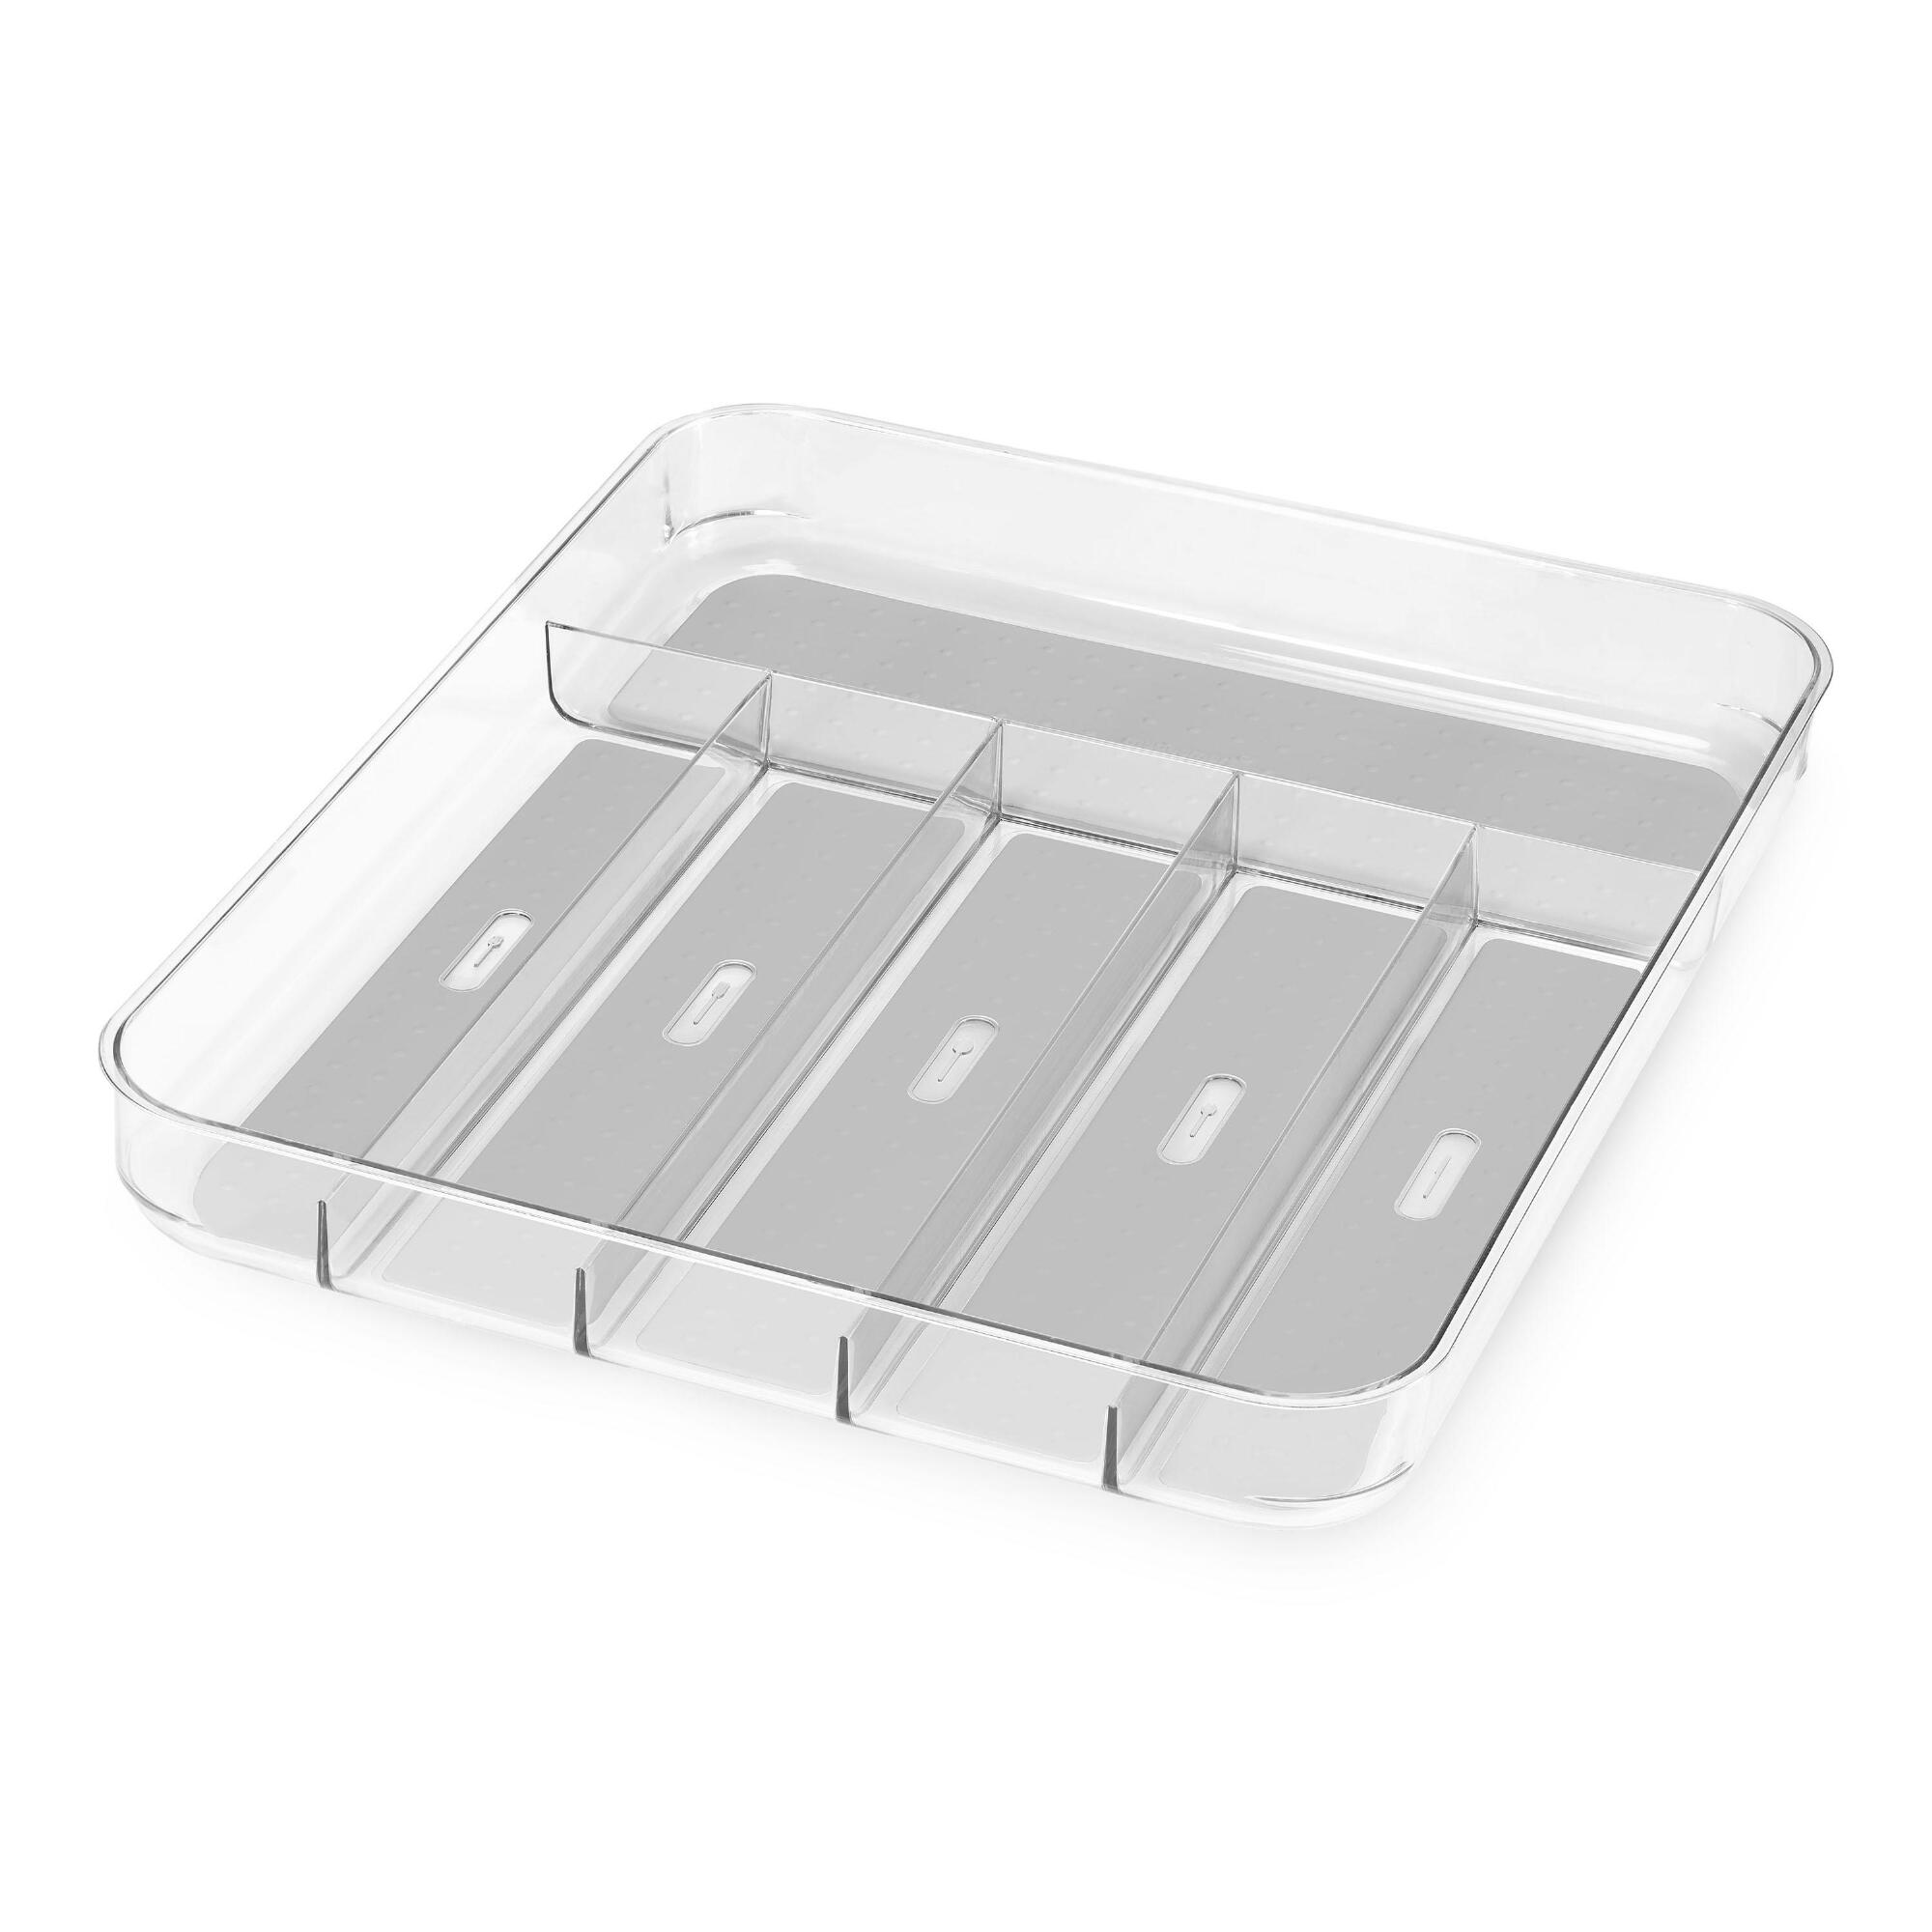 Large Madesmart Clear Soft Grip Silverware Tray by World Market